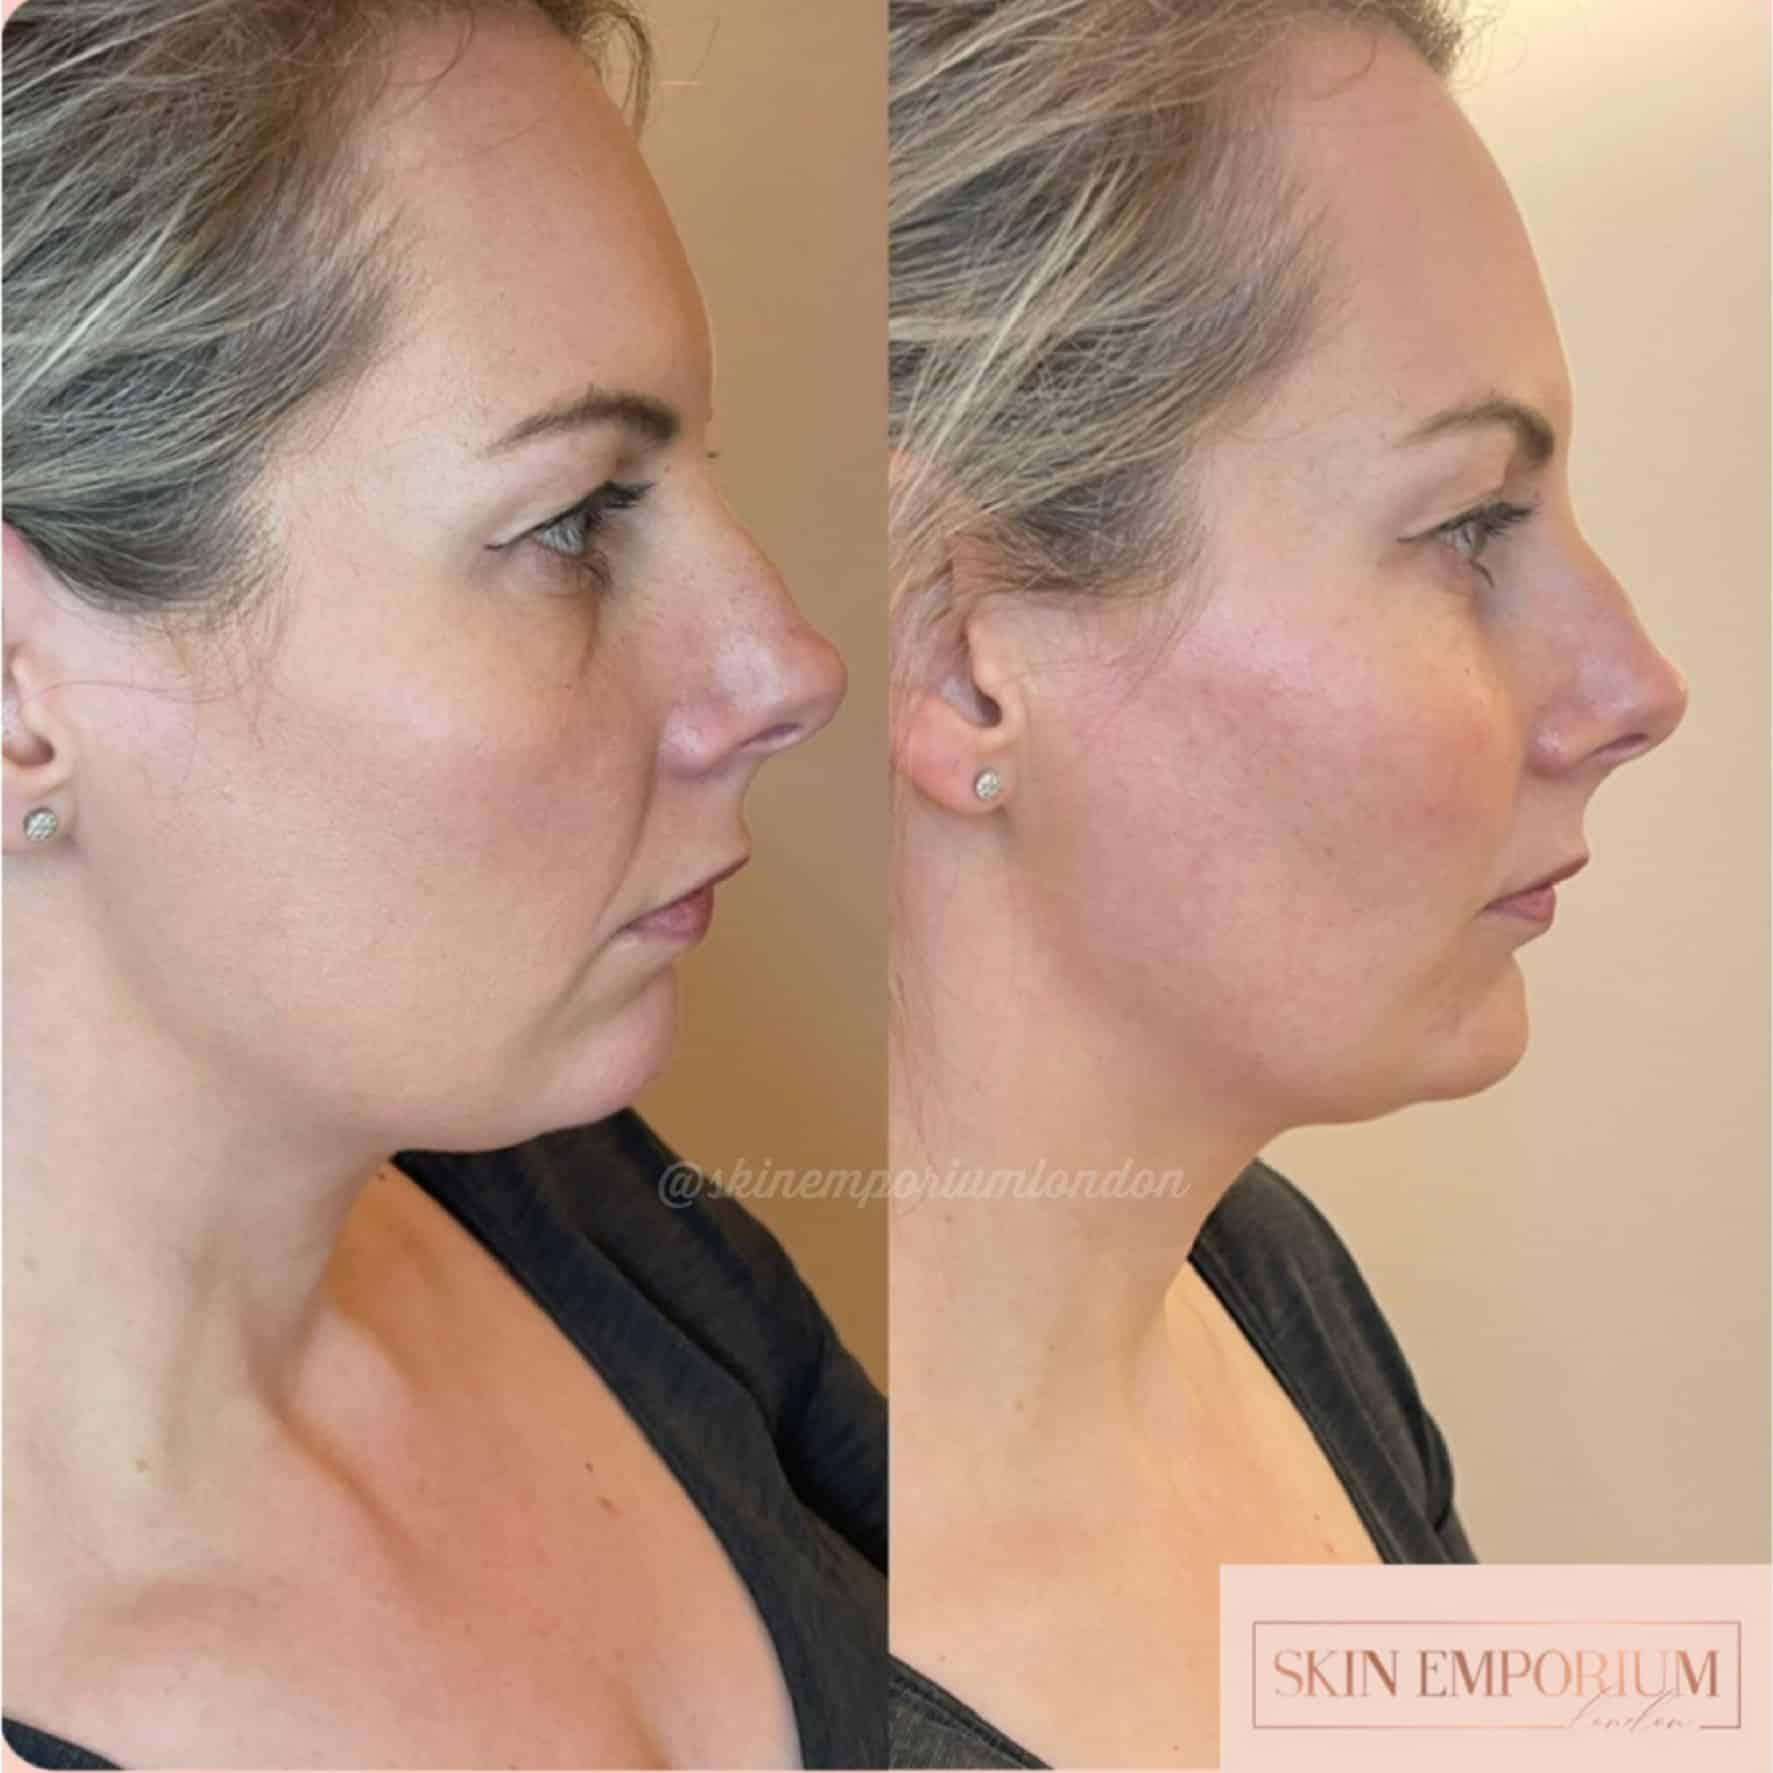 Before and after photo of a women having received dermal filler treatment at the Skin Emporium in Clapham, London.